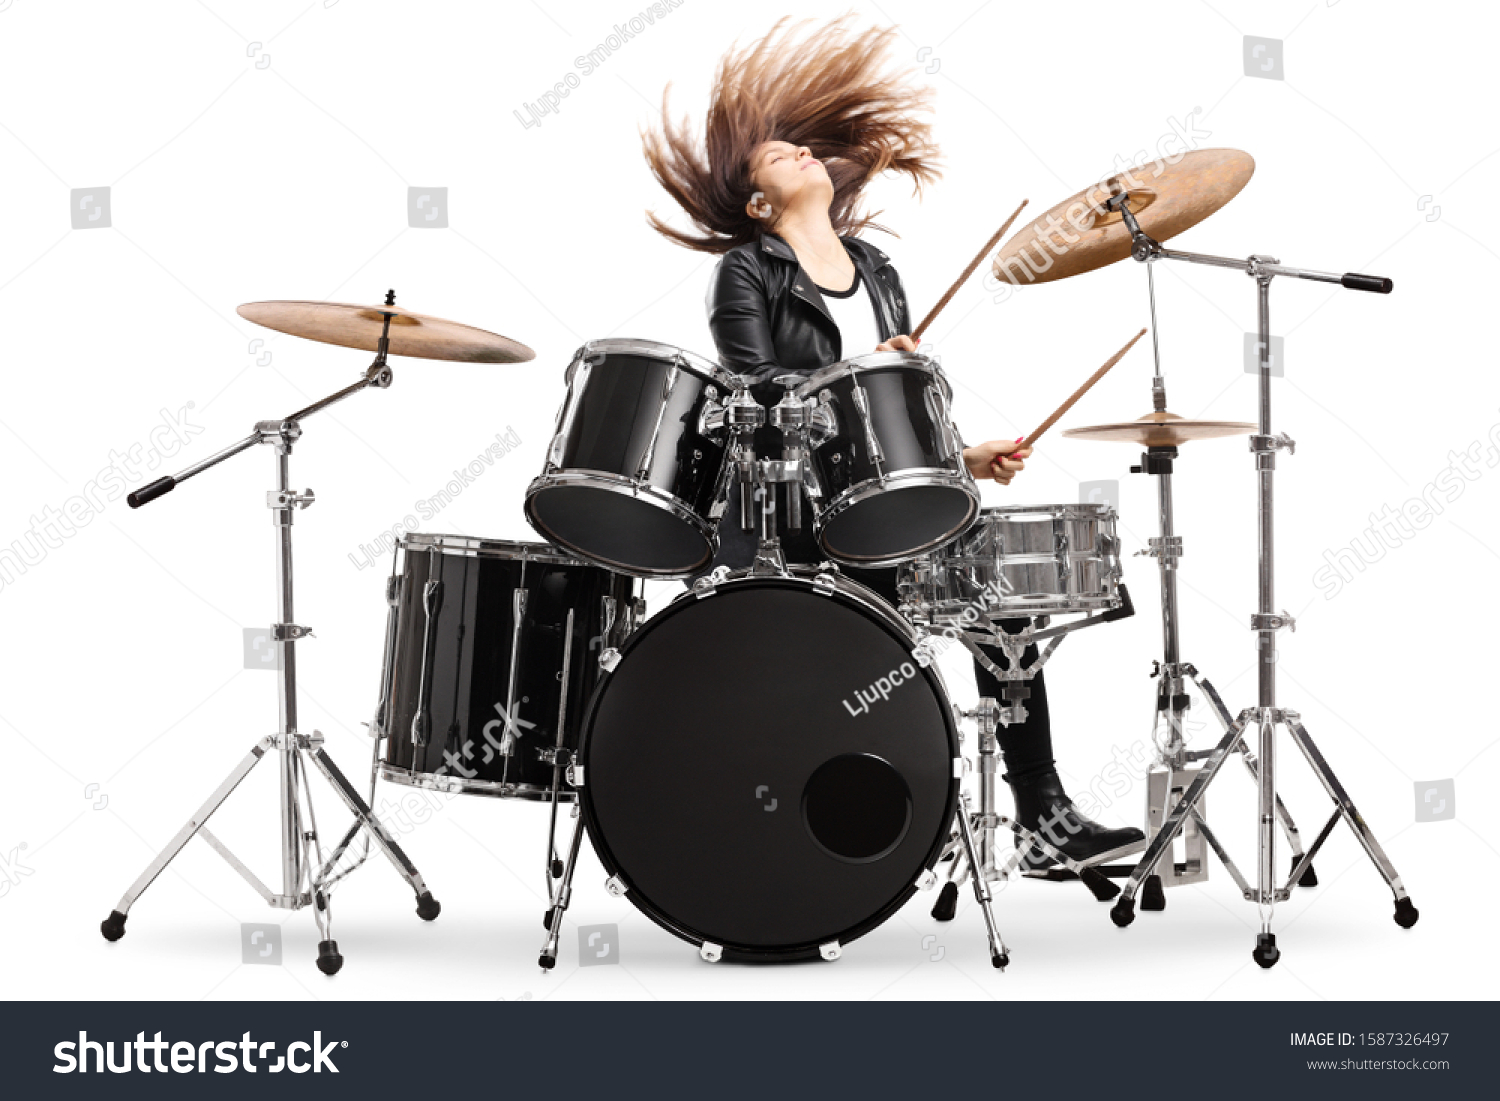 Energetic female drummer throwing her hair and playing drums isolated on white background #1587326497